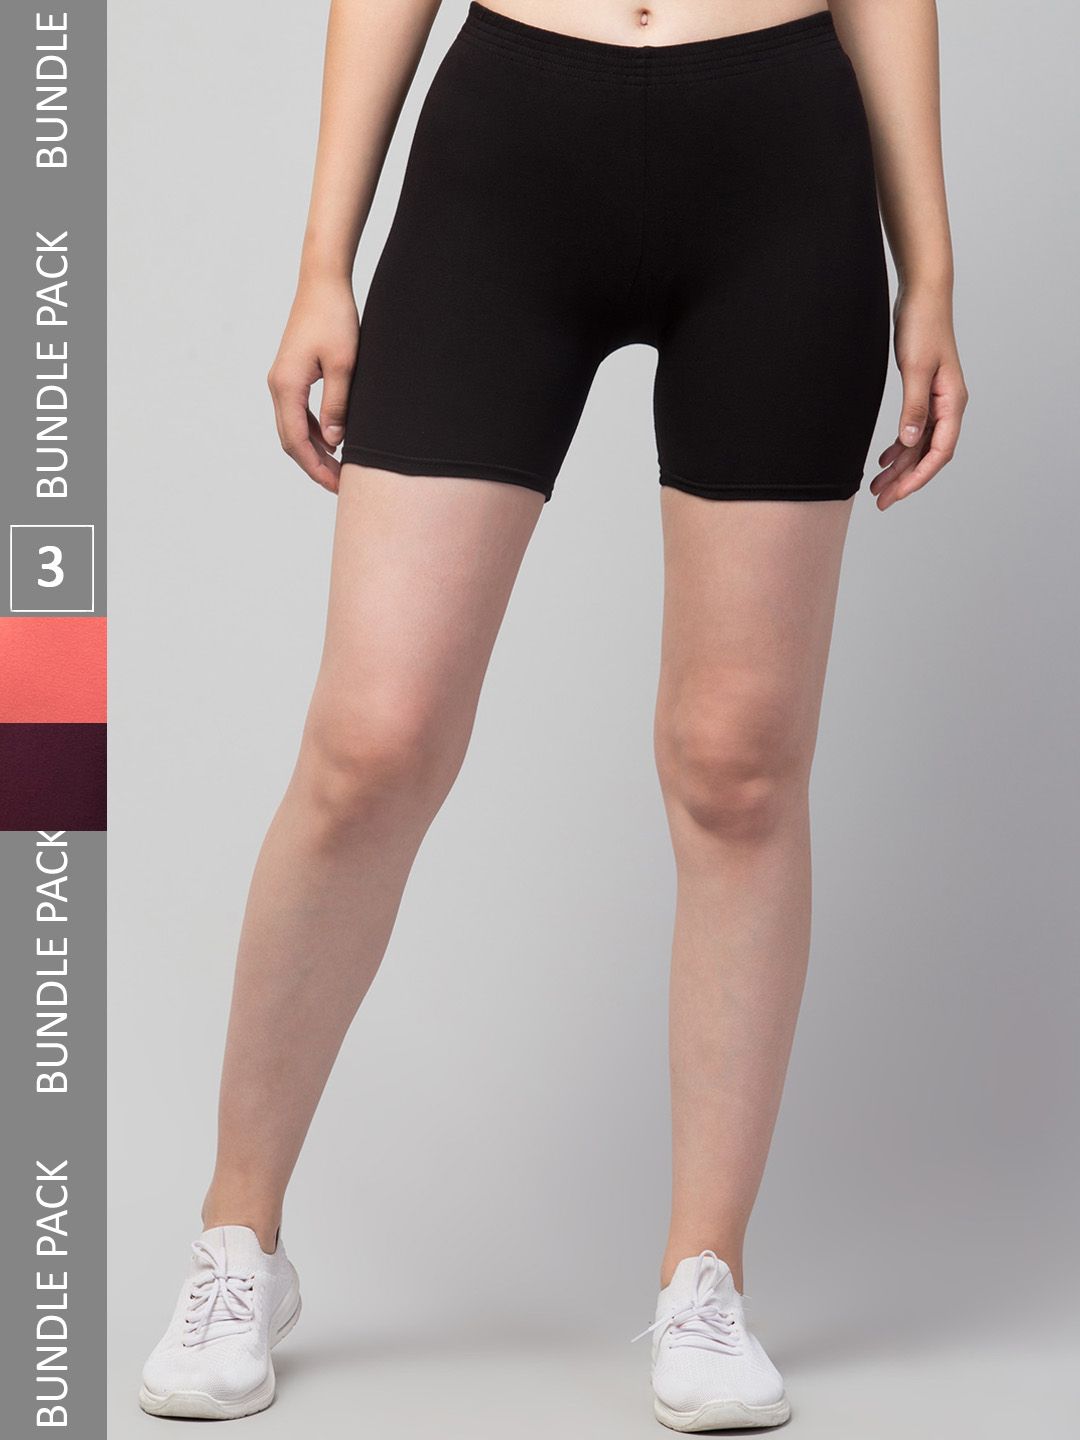 Apraa & Parma Women Black Skinny Fit Cycling Hot Pants Shorts Price in India